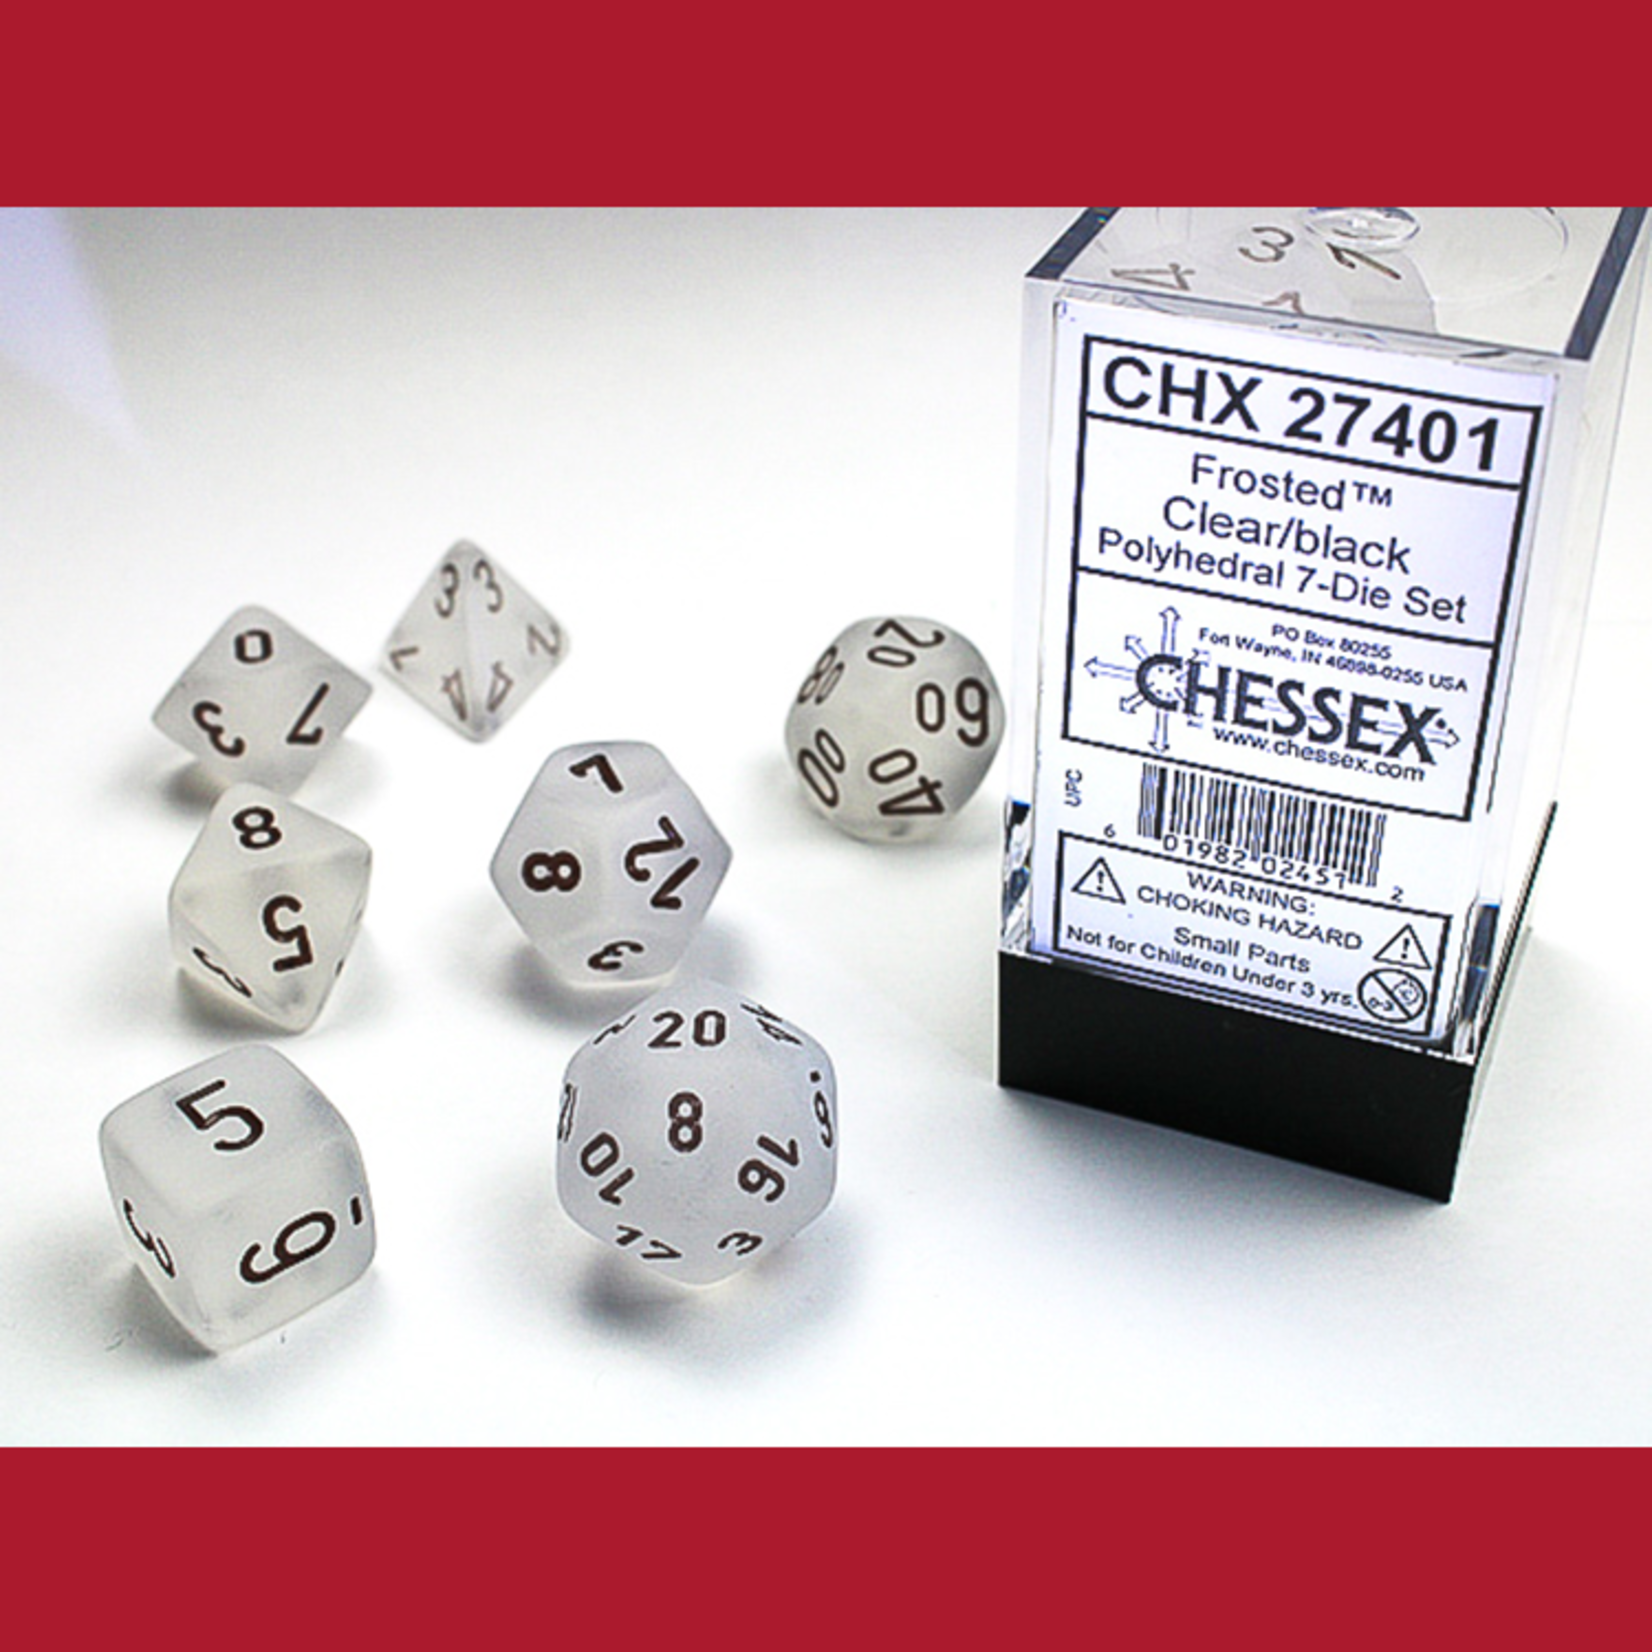 Chessex CHX 27401 Frosted Clear / Black Polyhedral 7-die Set